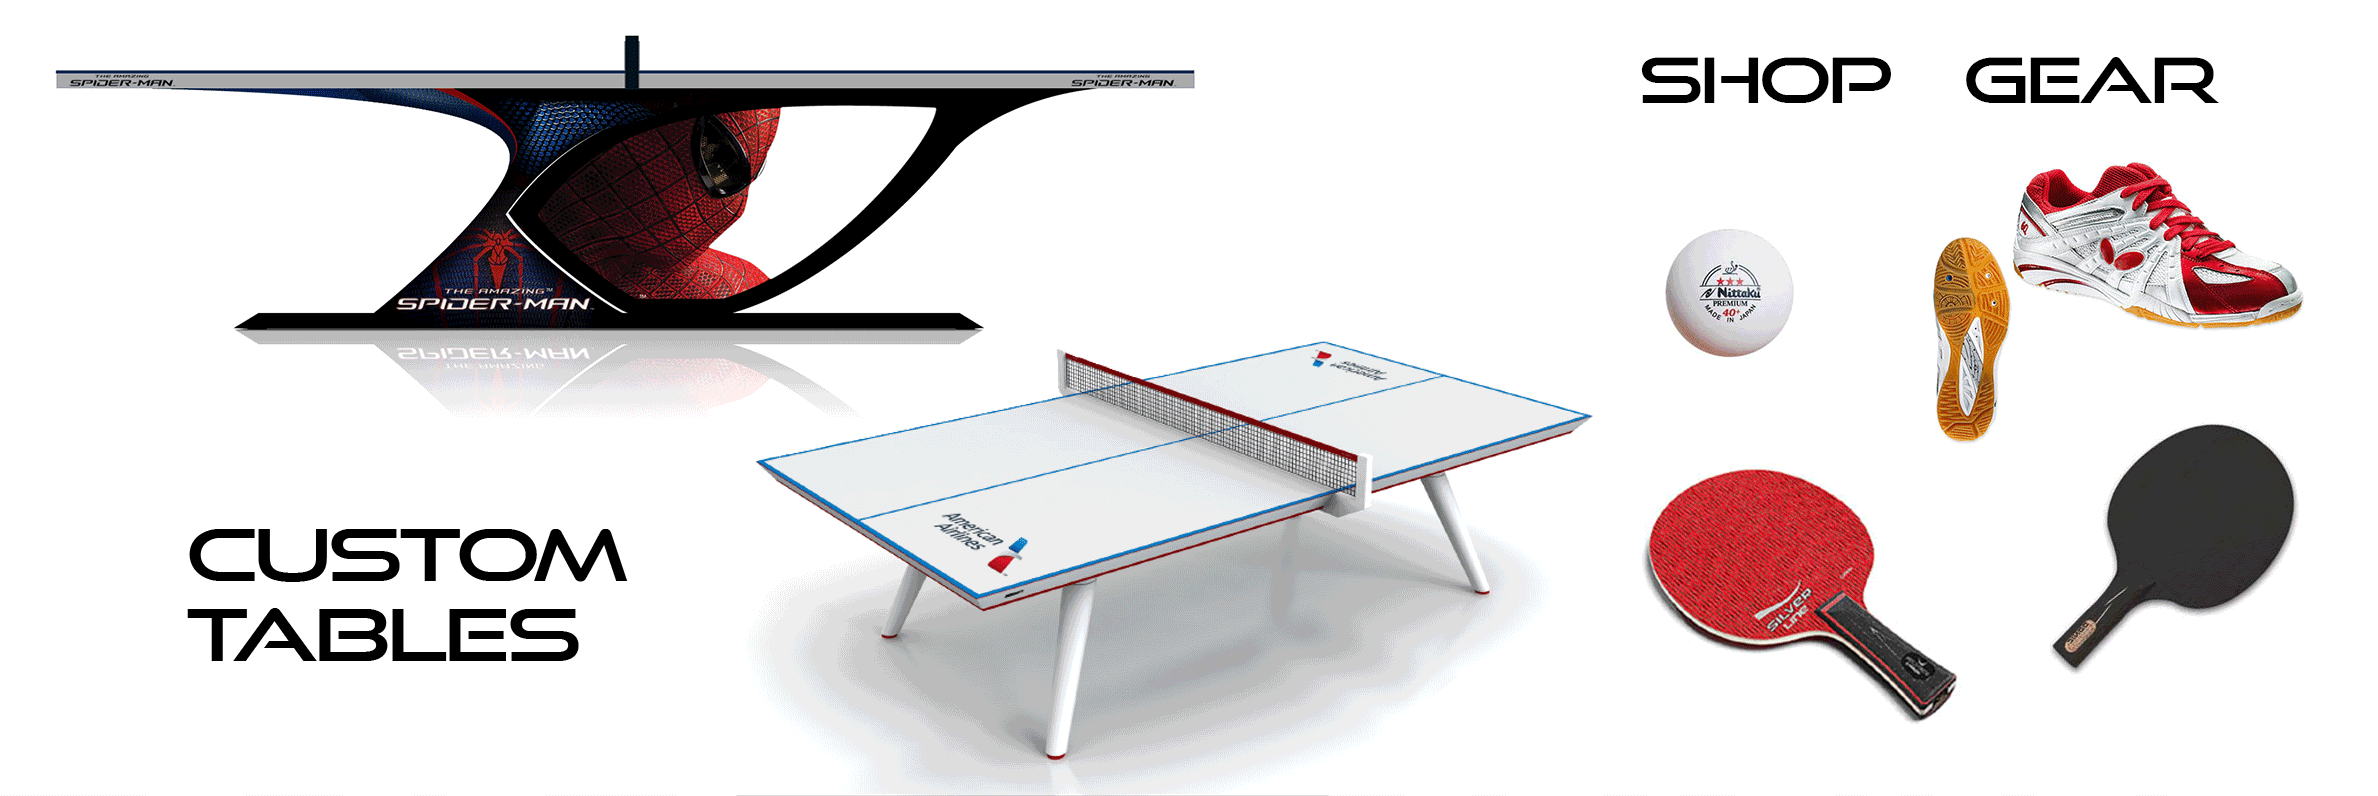 Gilbert Table Tennis Center Los Angeles Ping Pong Tables Equipment Pro Shop Lessons and Instruction